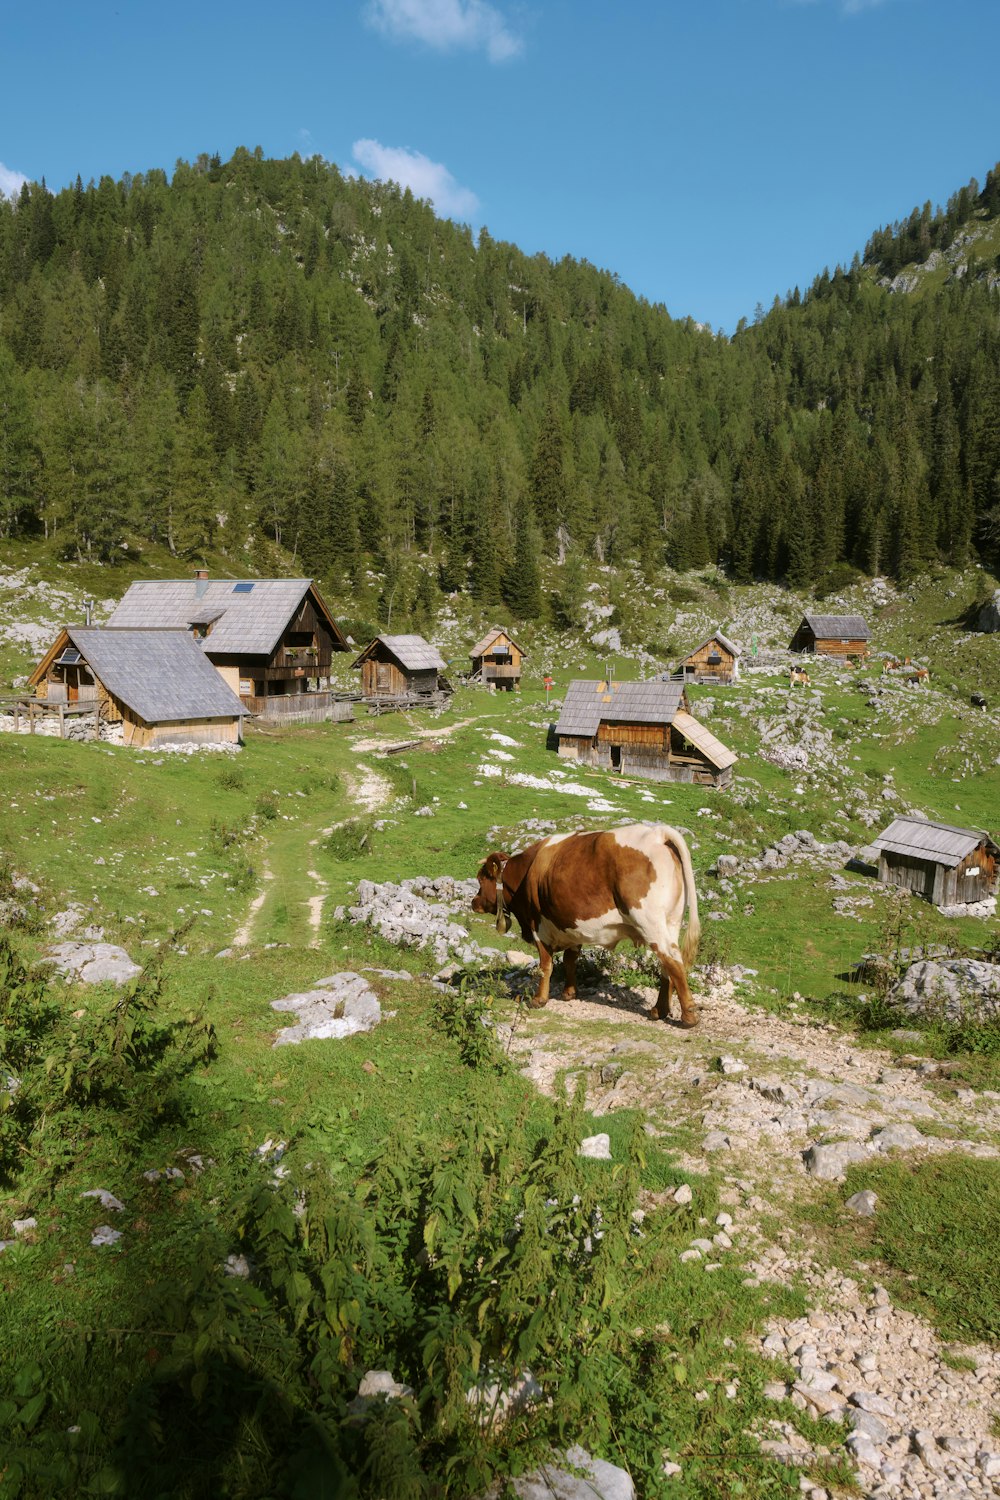 a brown and white cow standing on top of a lush green field